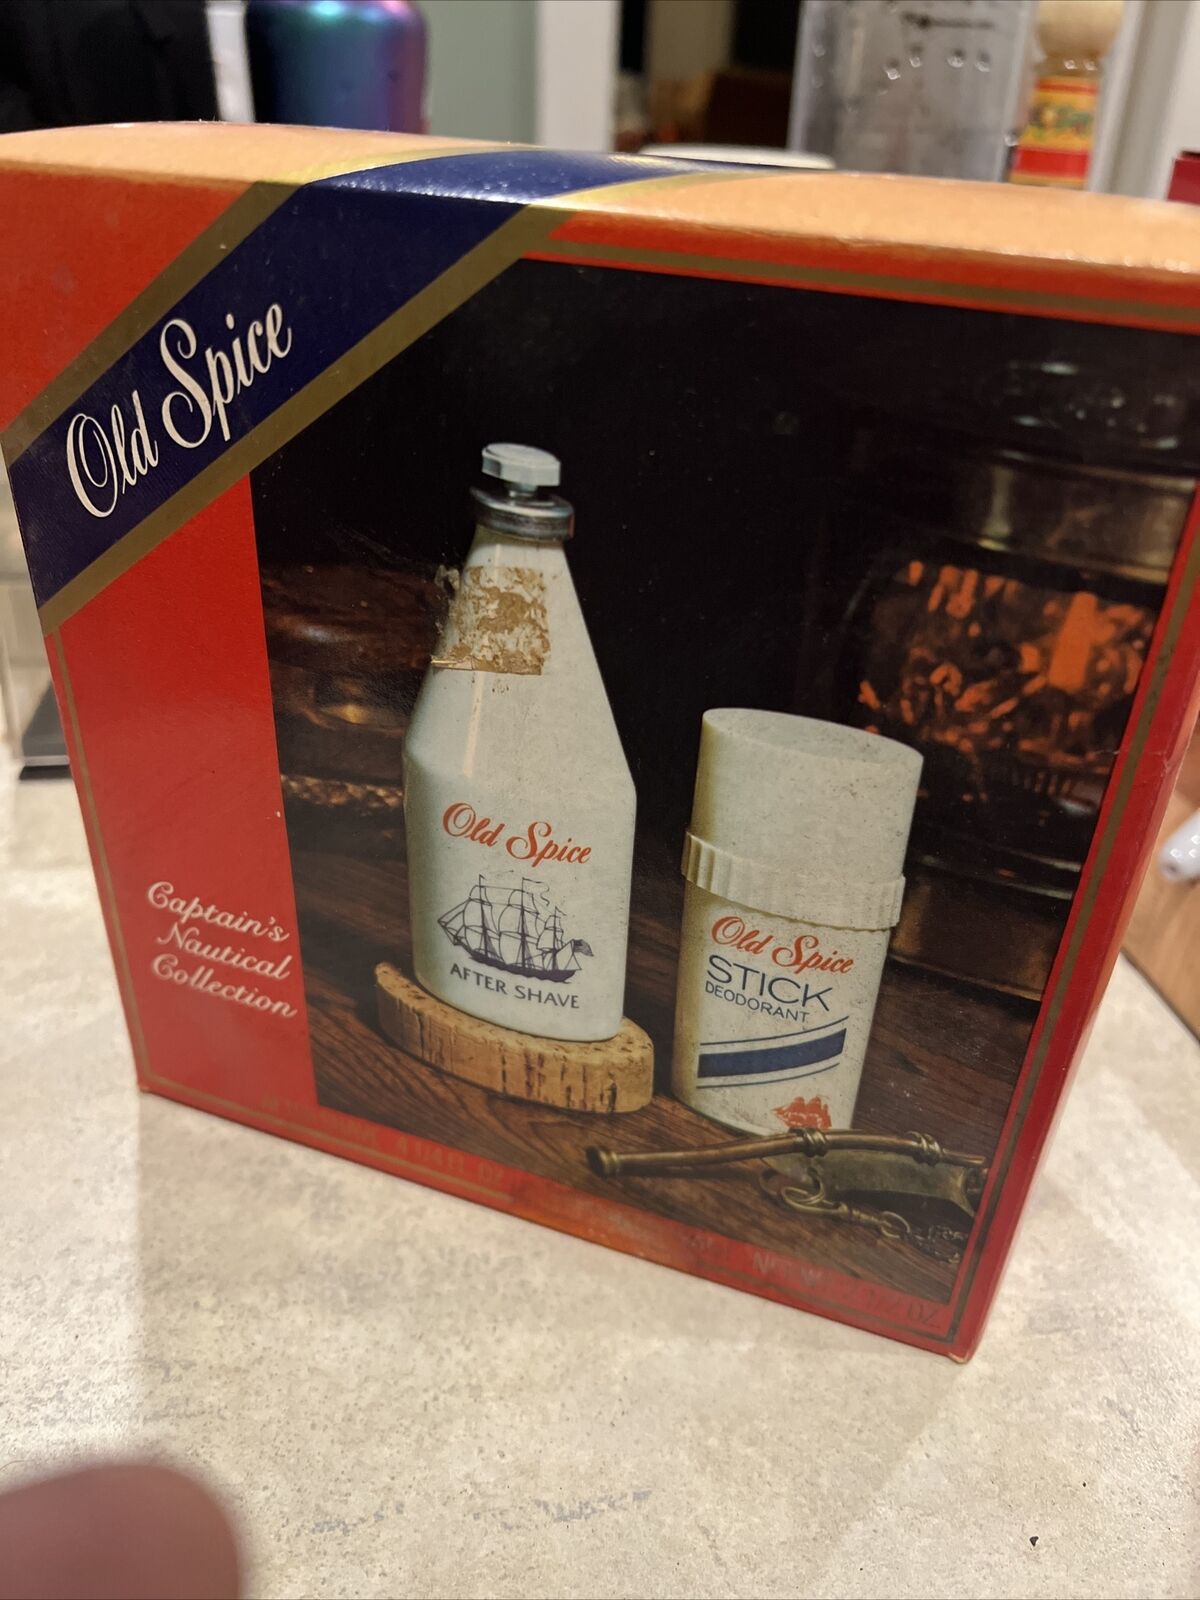 VTG Old Spice Captain\'s Nautical Collection Box Set Of Deodorant & Aftershave